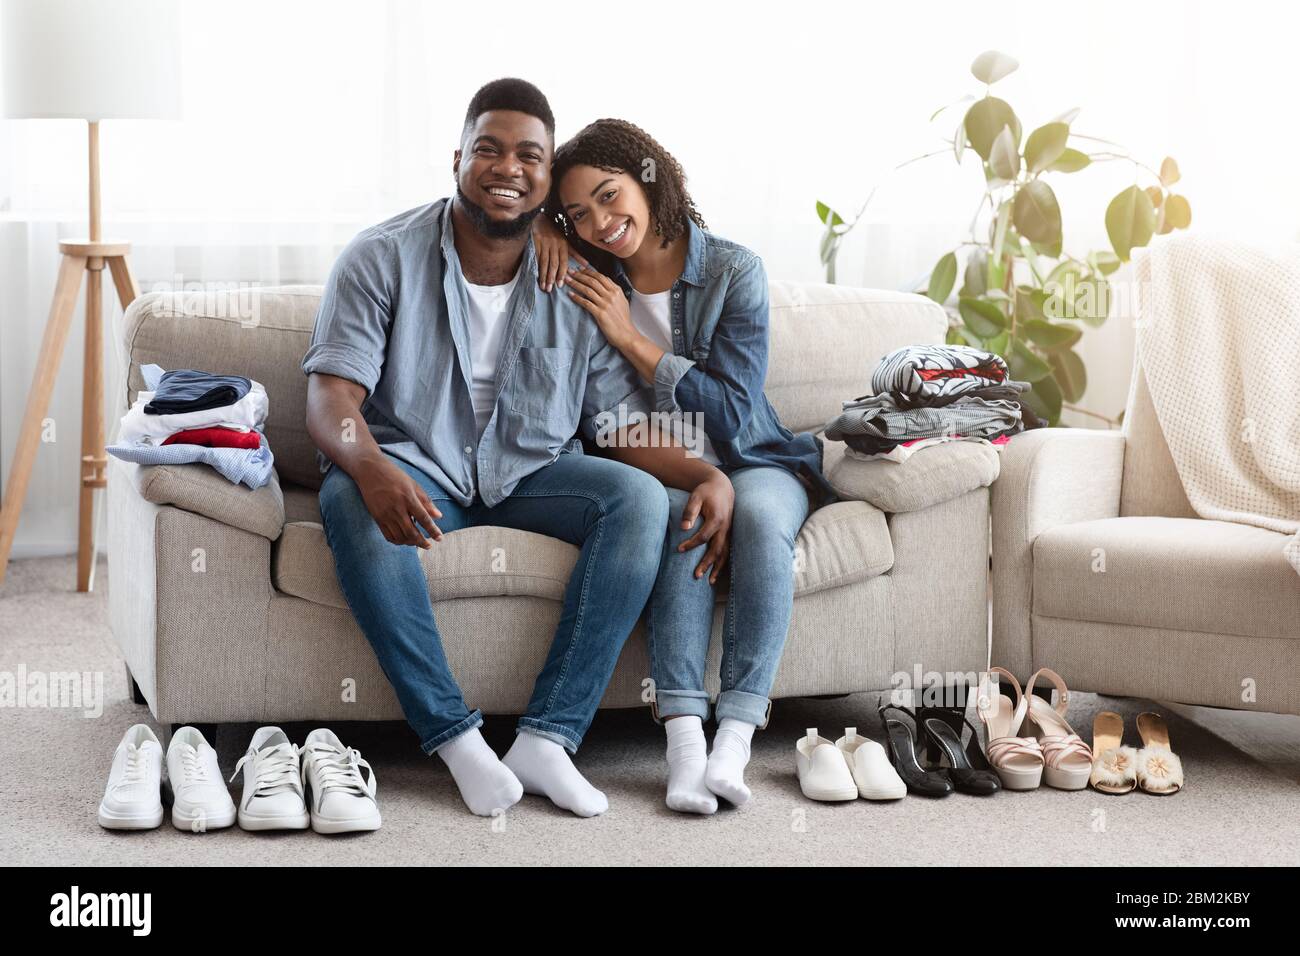 Happy Black Couple Sitting On Couch With Folded Clothes And Shoes Around Stock Photo